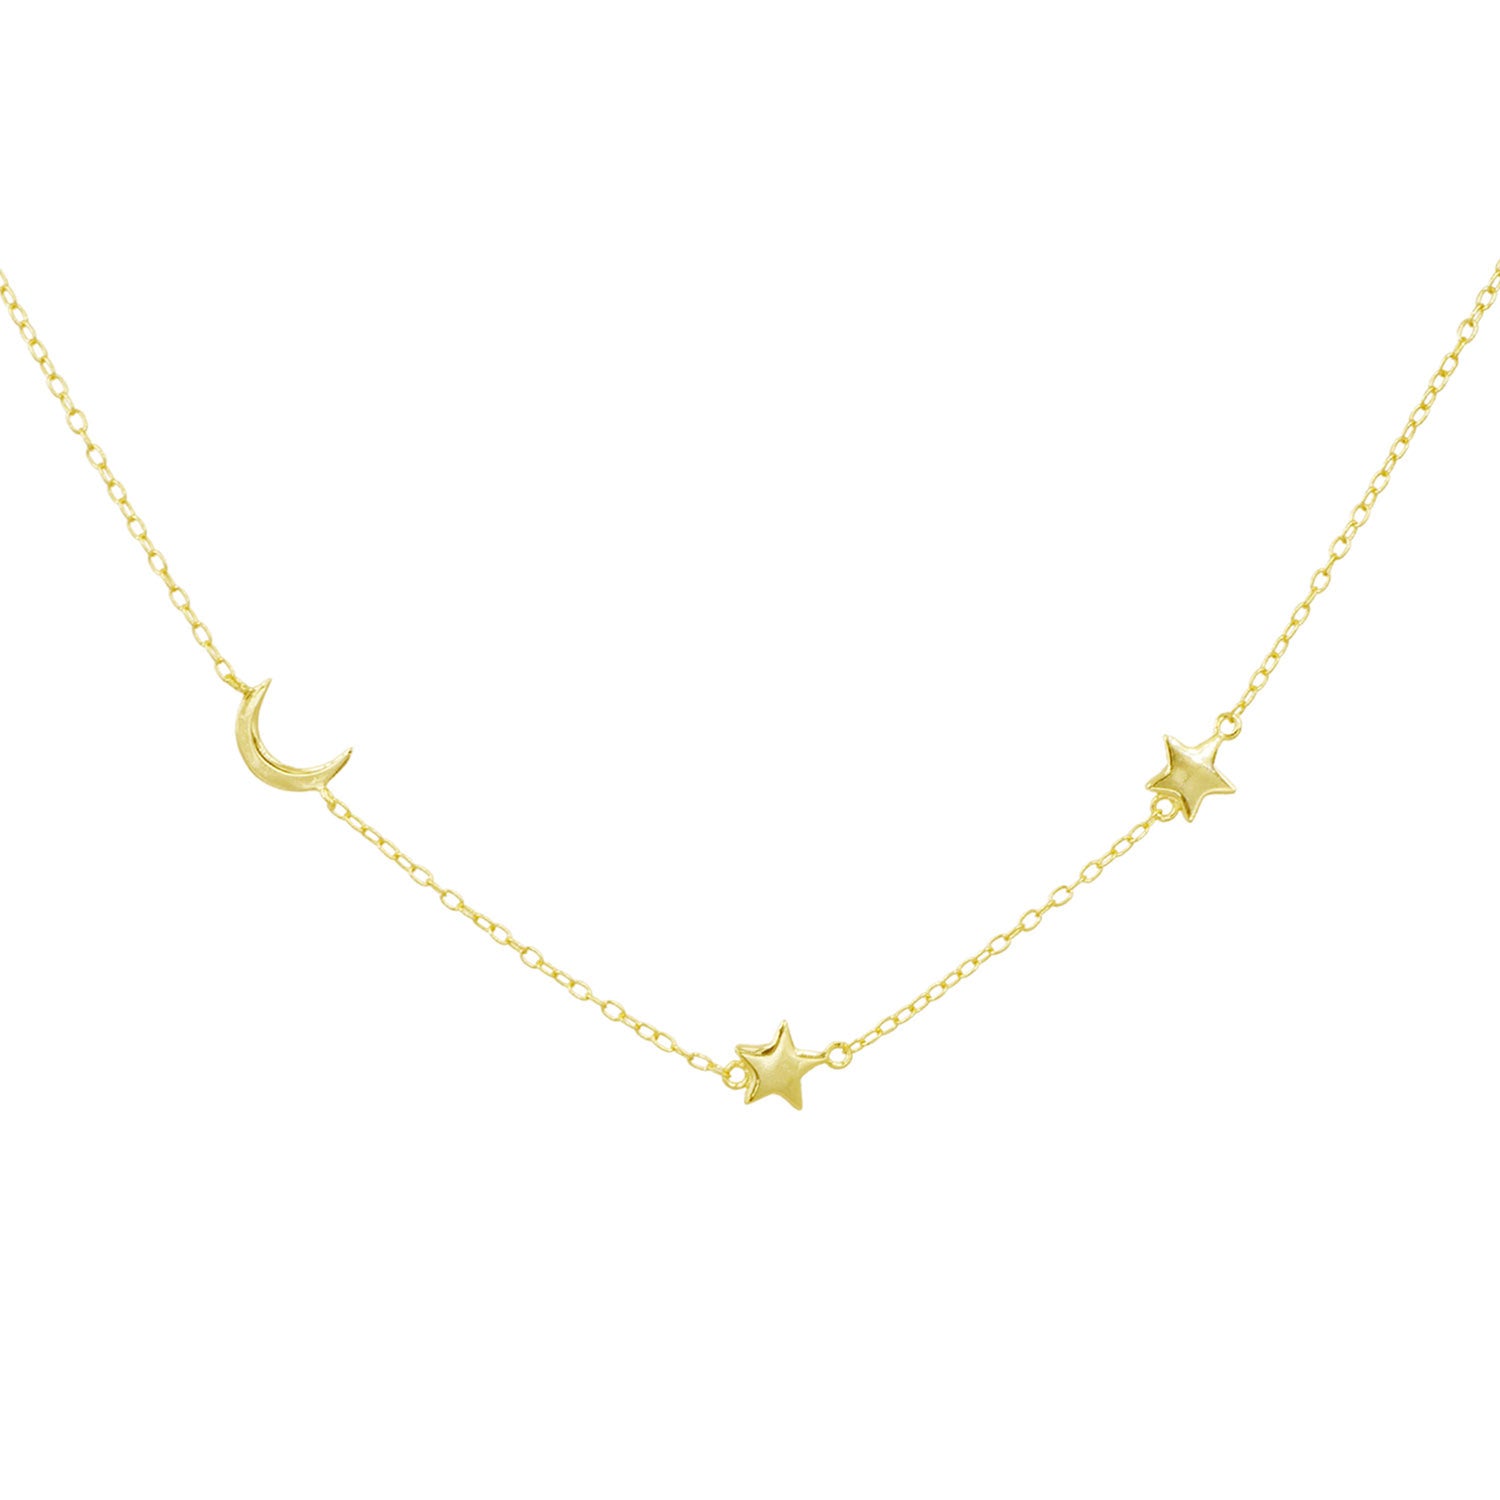 Off Center Moon and Stars Necklace Gold | Tiny Moon with Stars